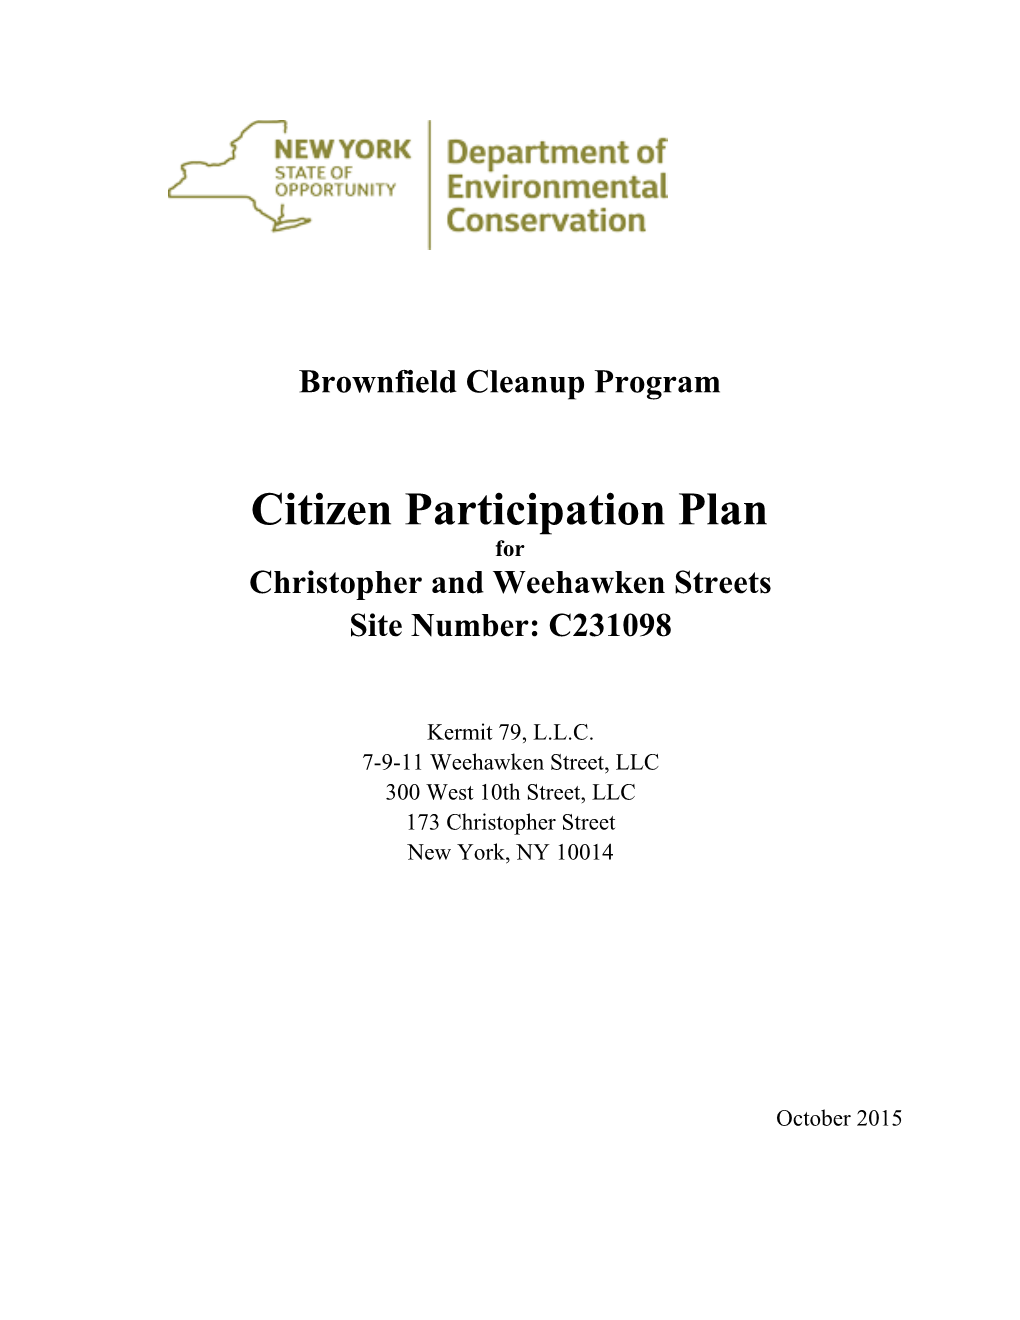 Citizen Participation Plan for Christopher and Weehawken Streets Site Number: C231098